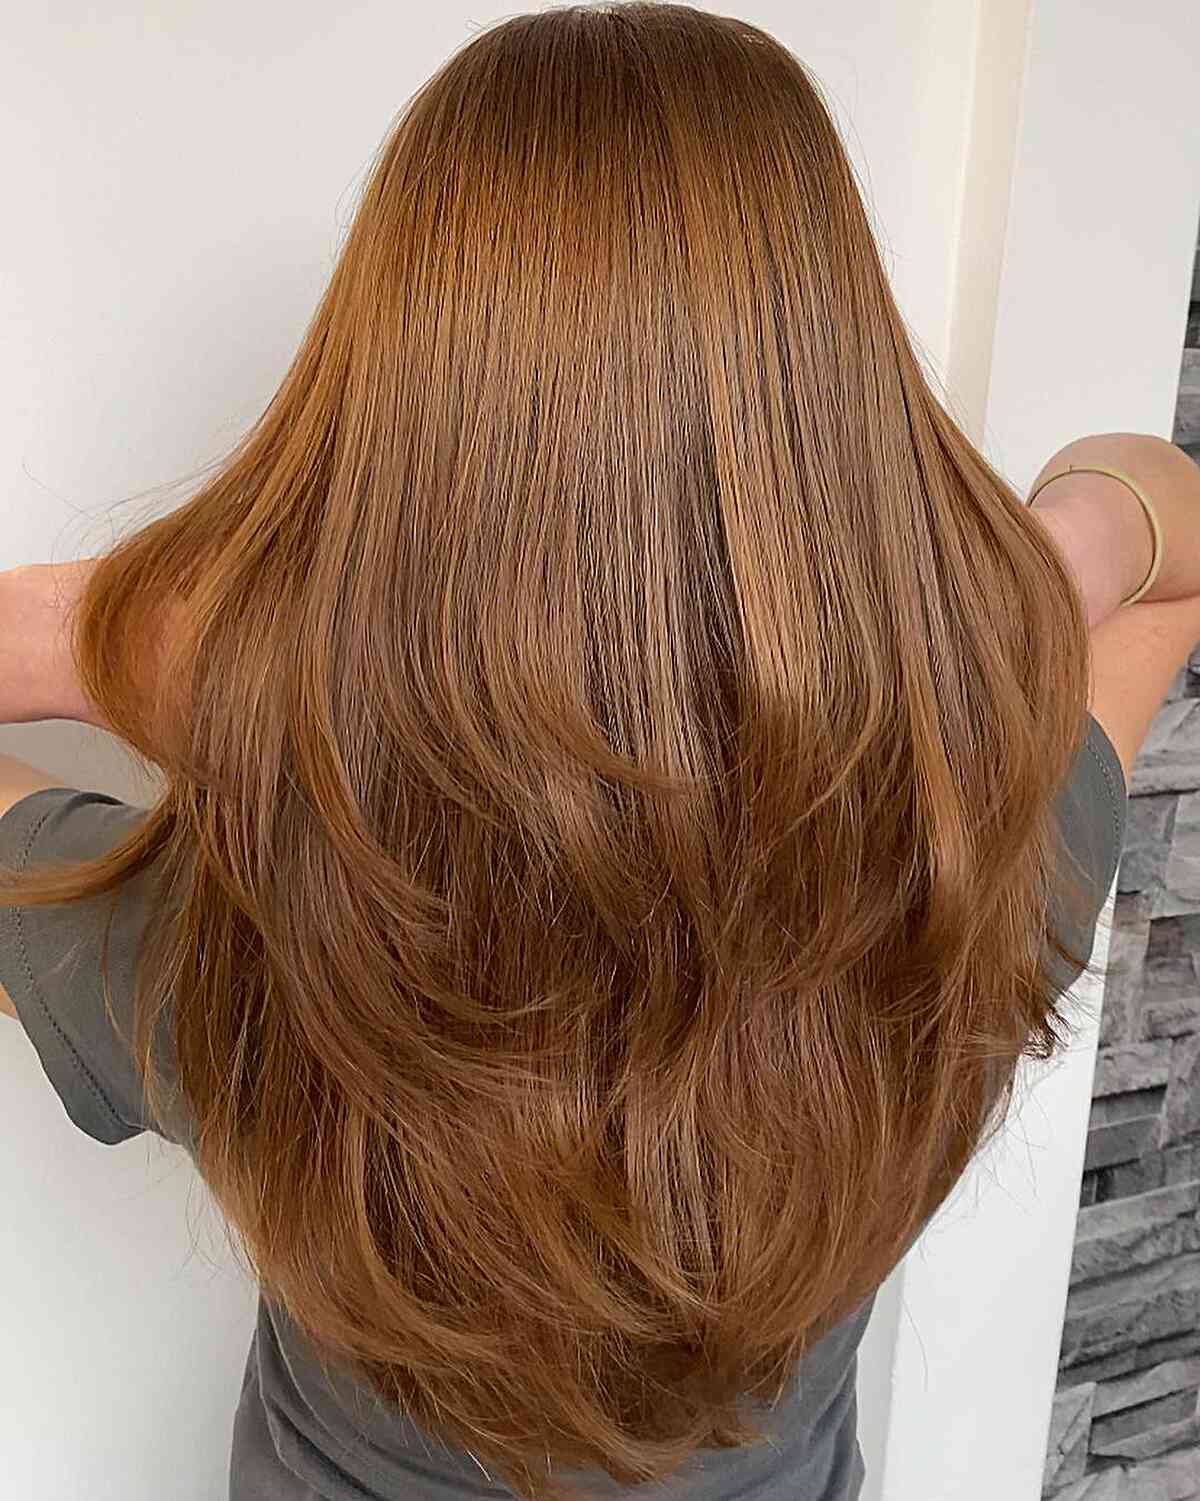 Short layers on long straight hair